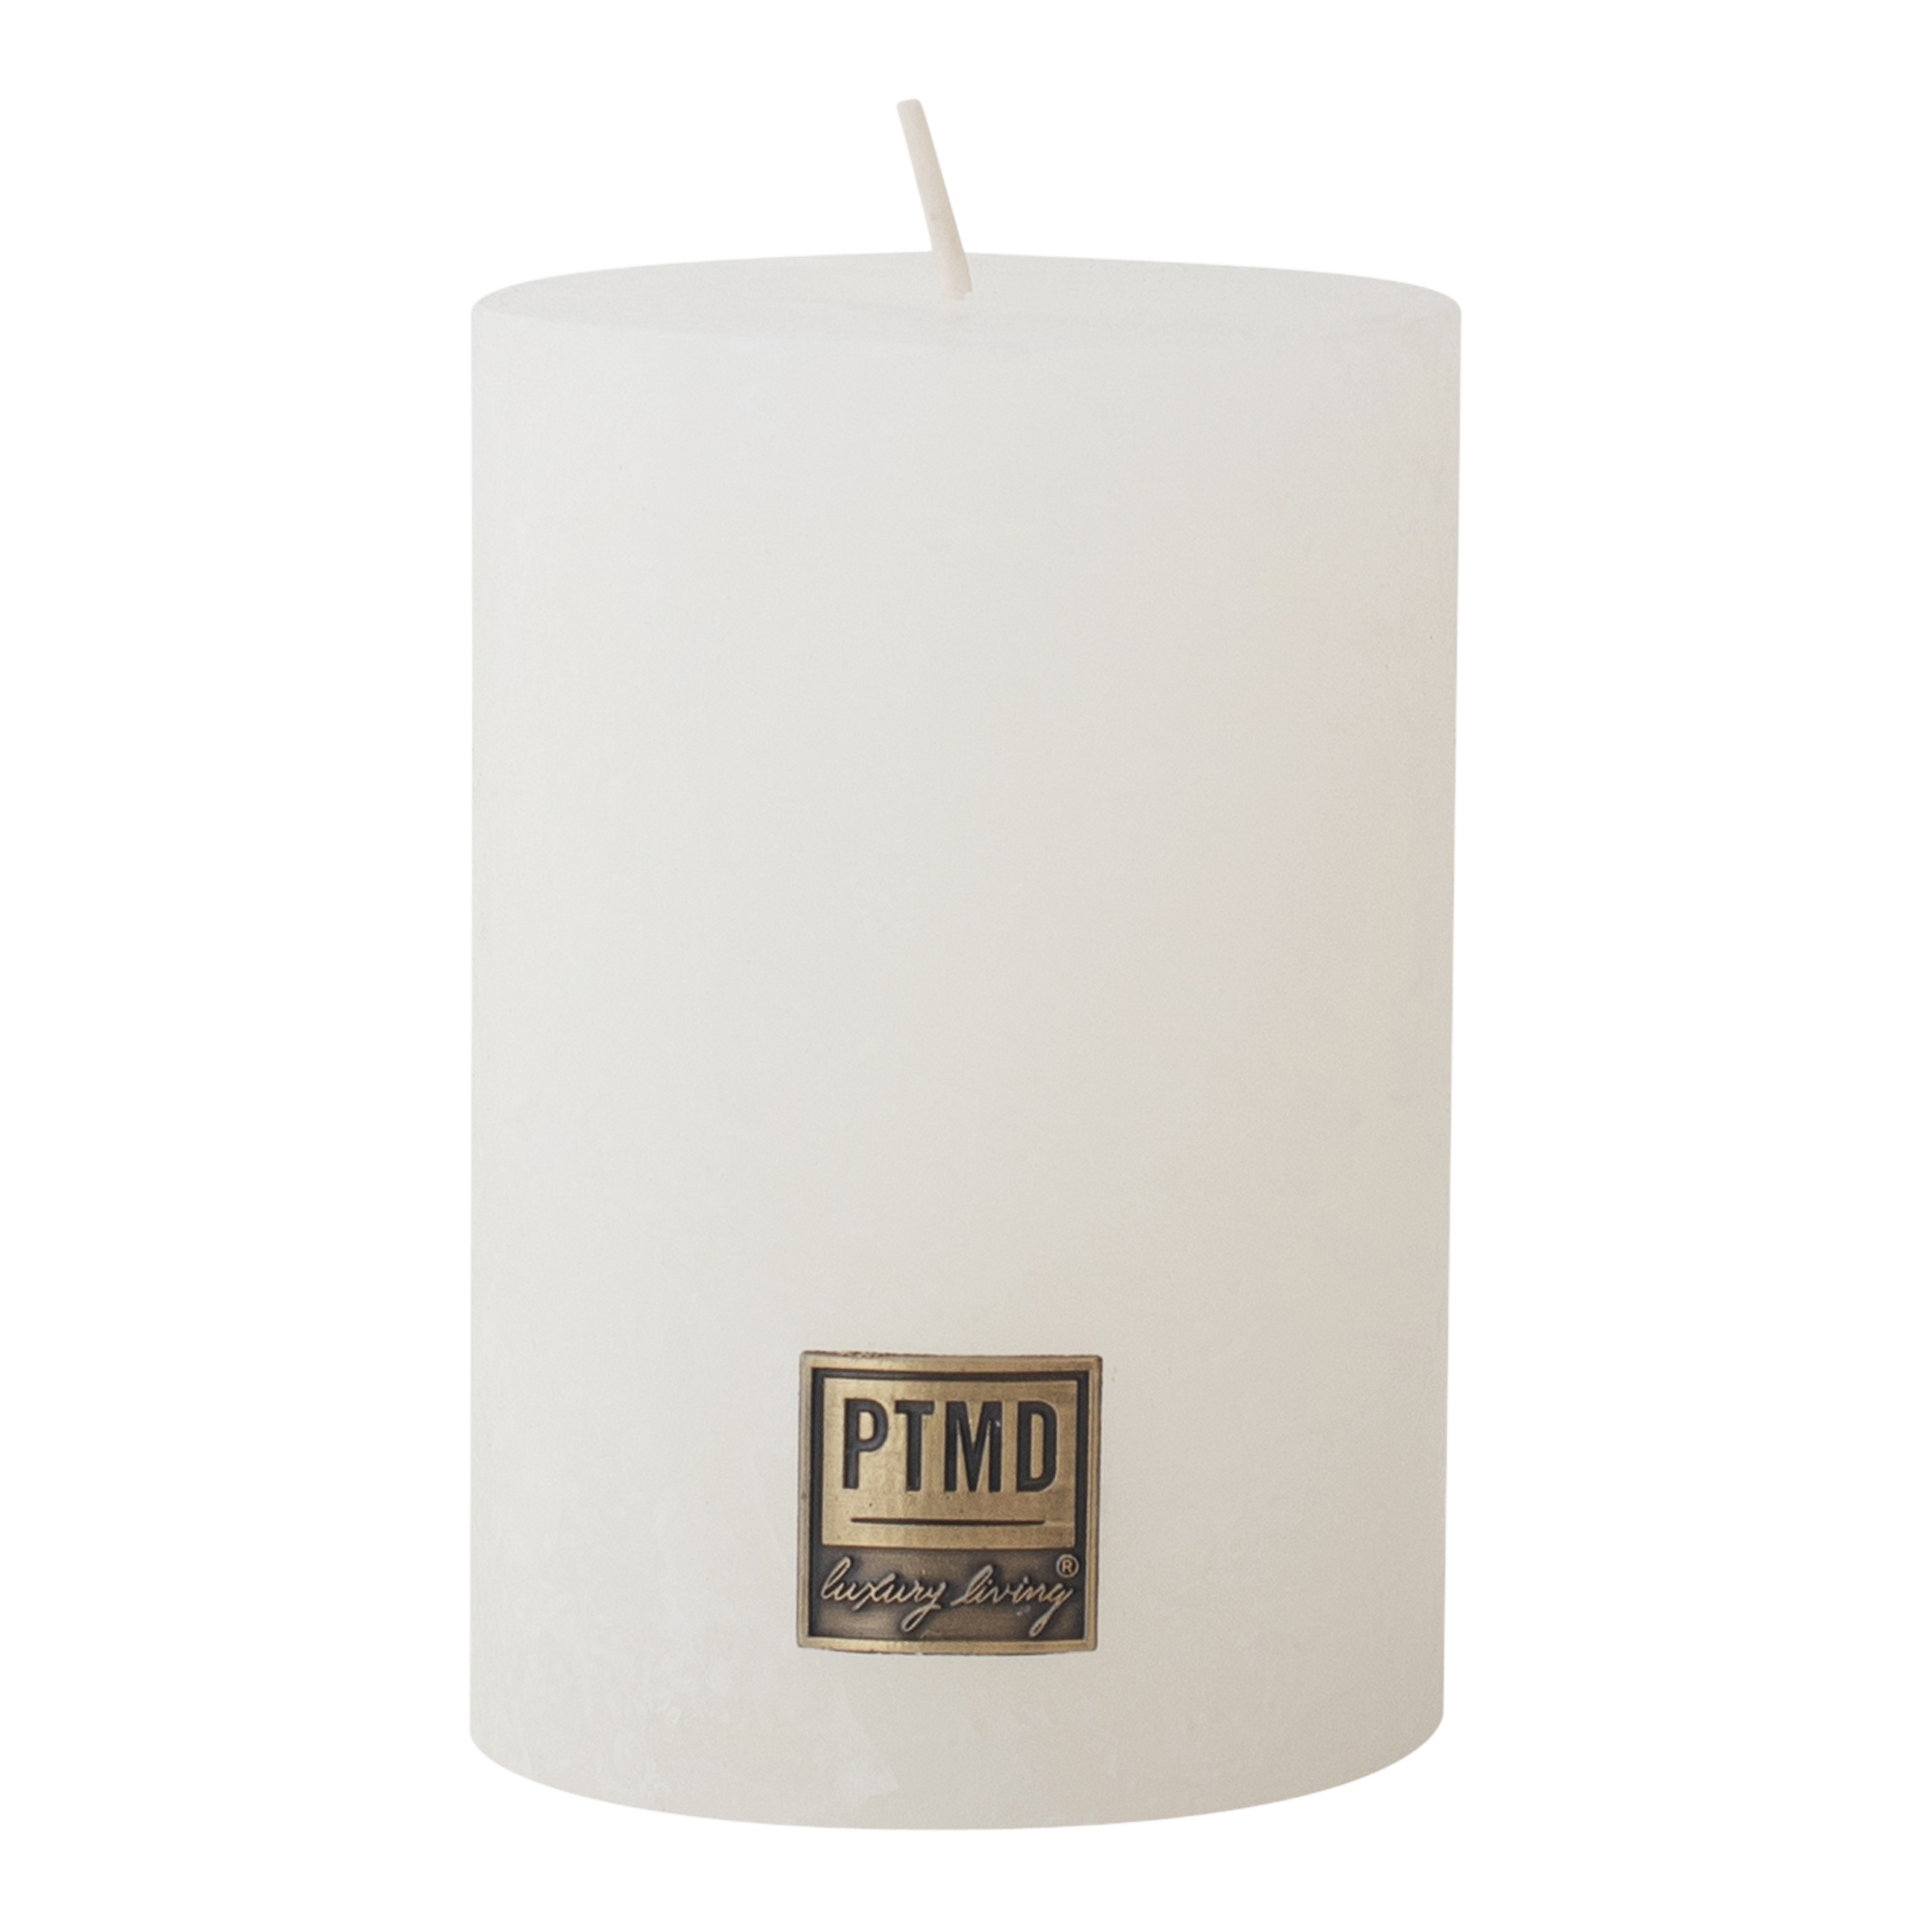 PTMD 10 x 7cm Rustic Hot White Pillar Candle